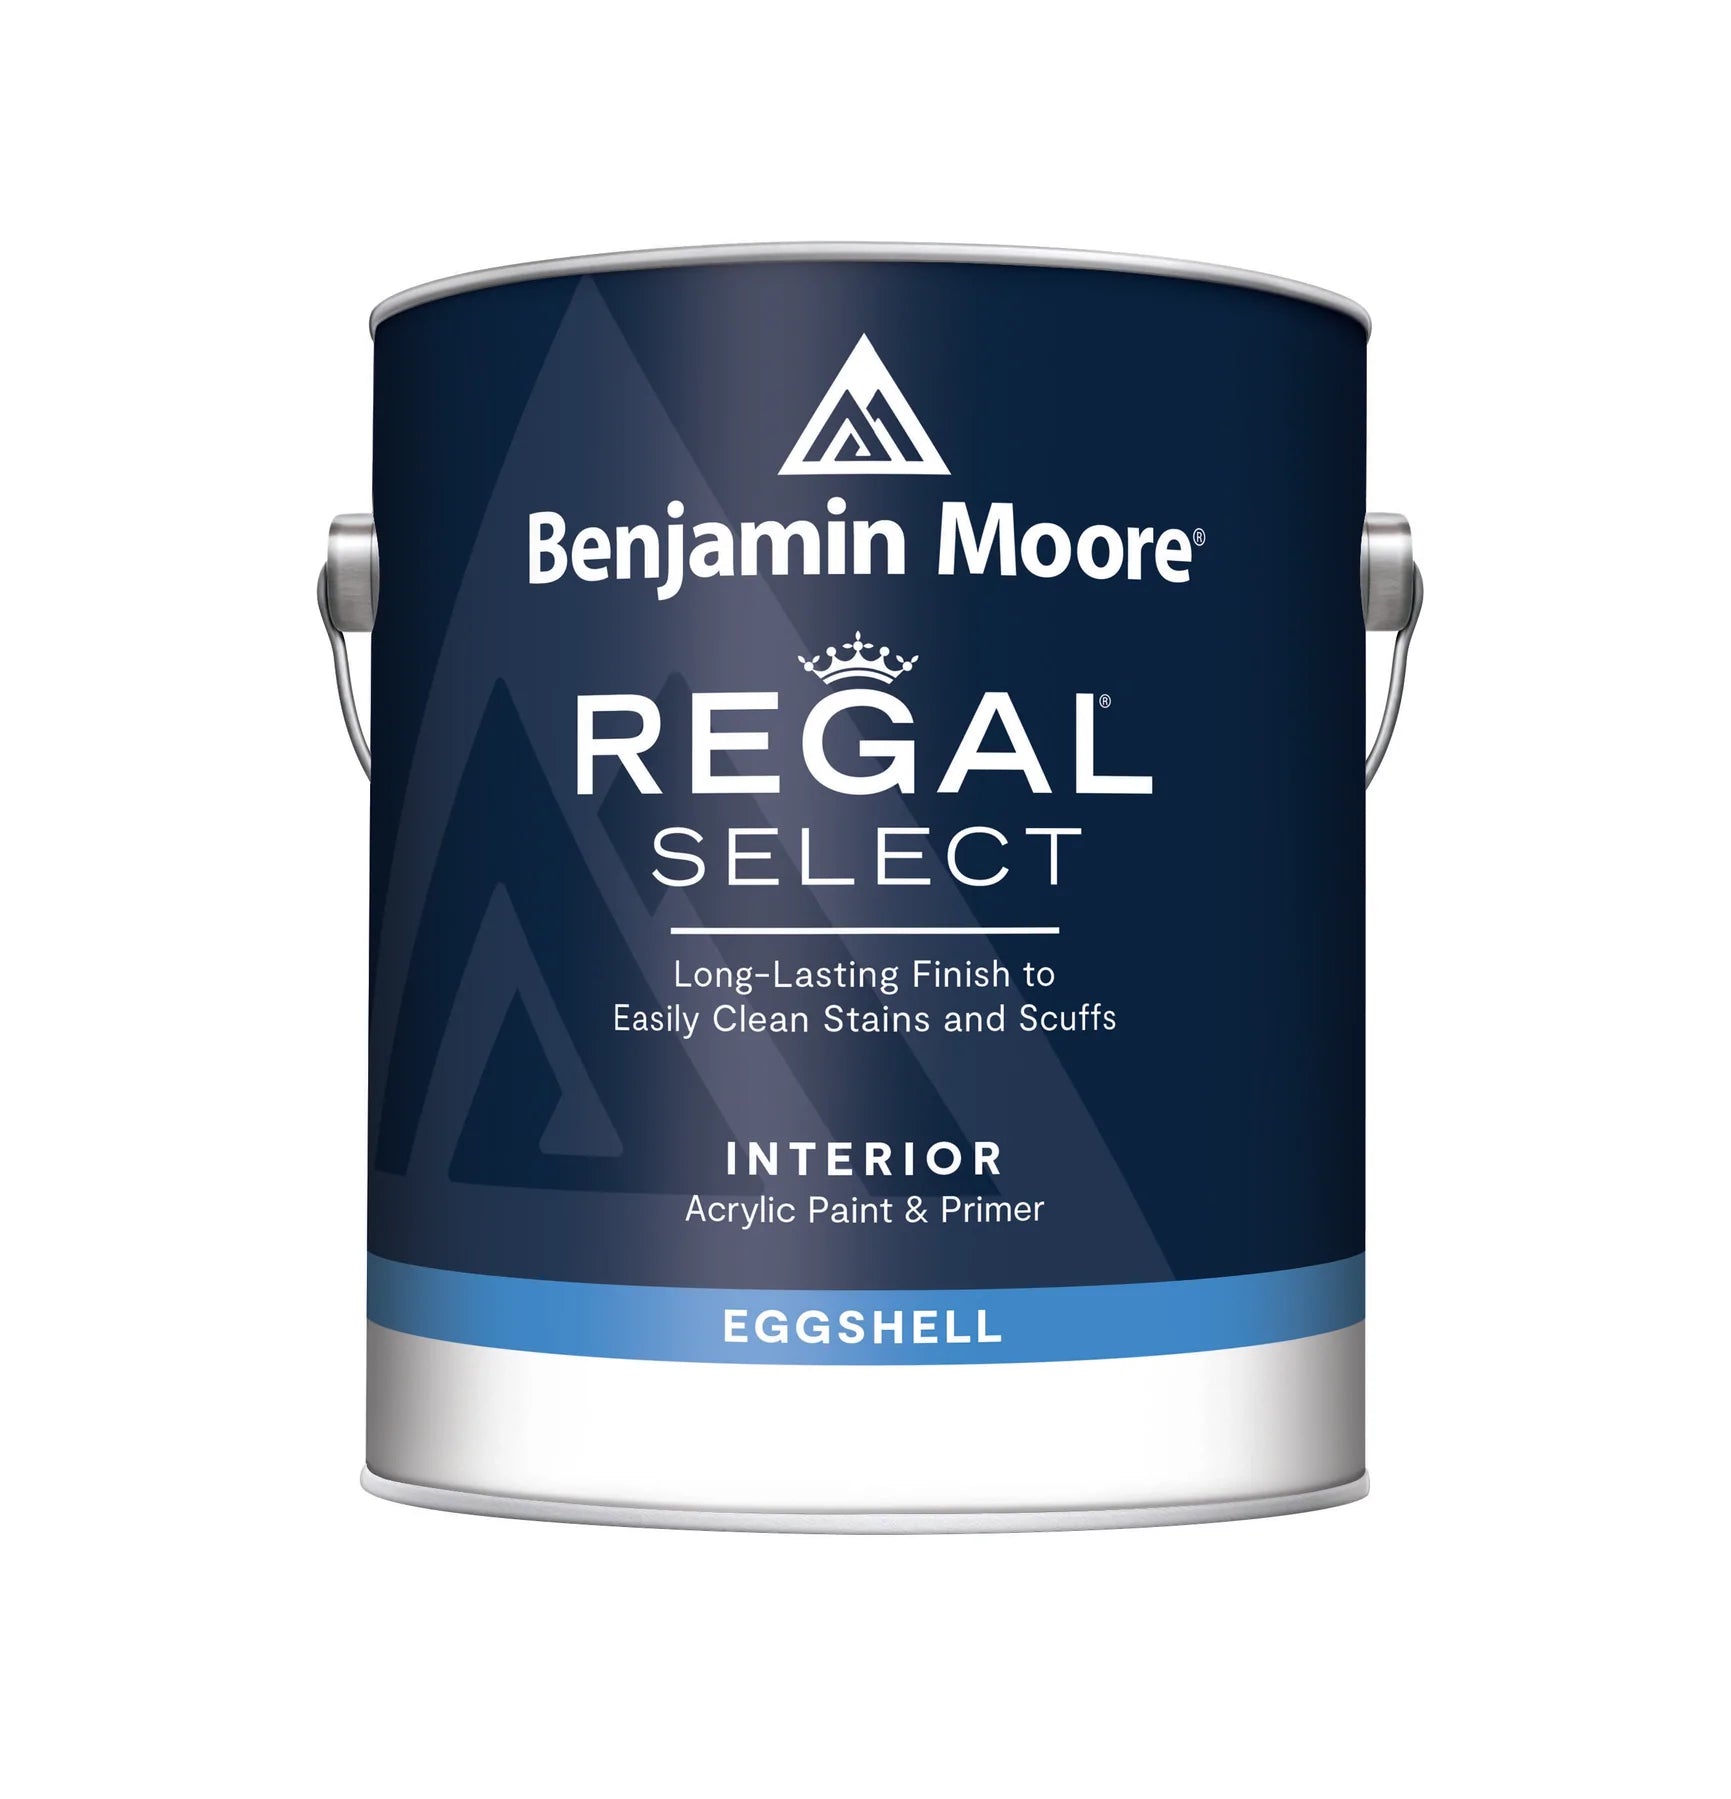 Regal® Select Premium Stain & Scuff Resistant Interior Paint, For Walls, Doors & Trim - The Paint People